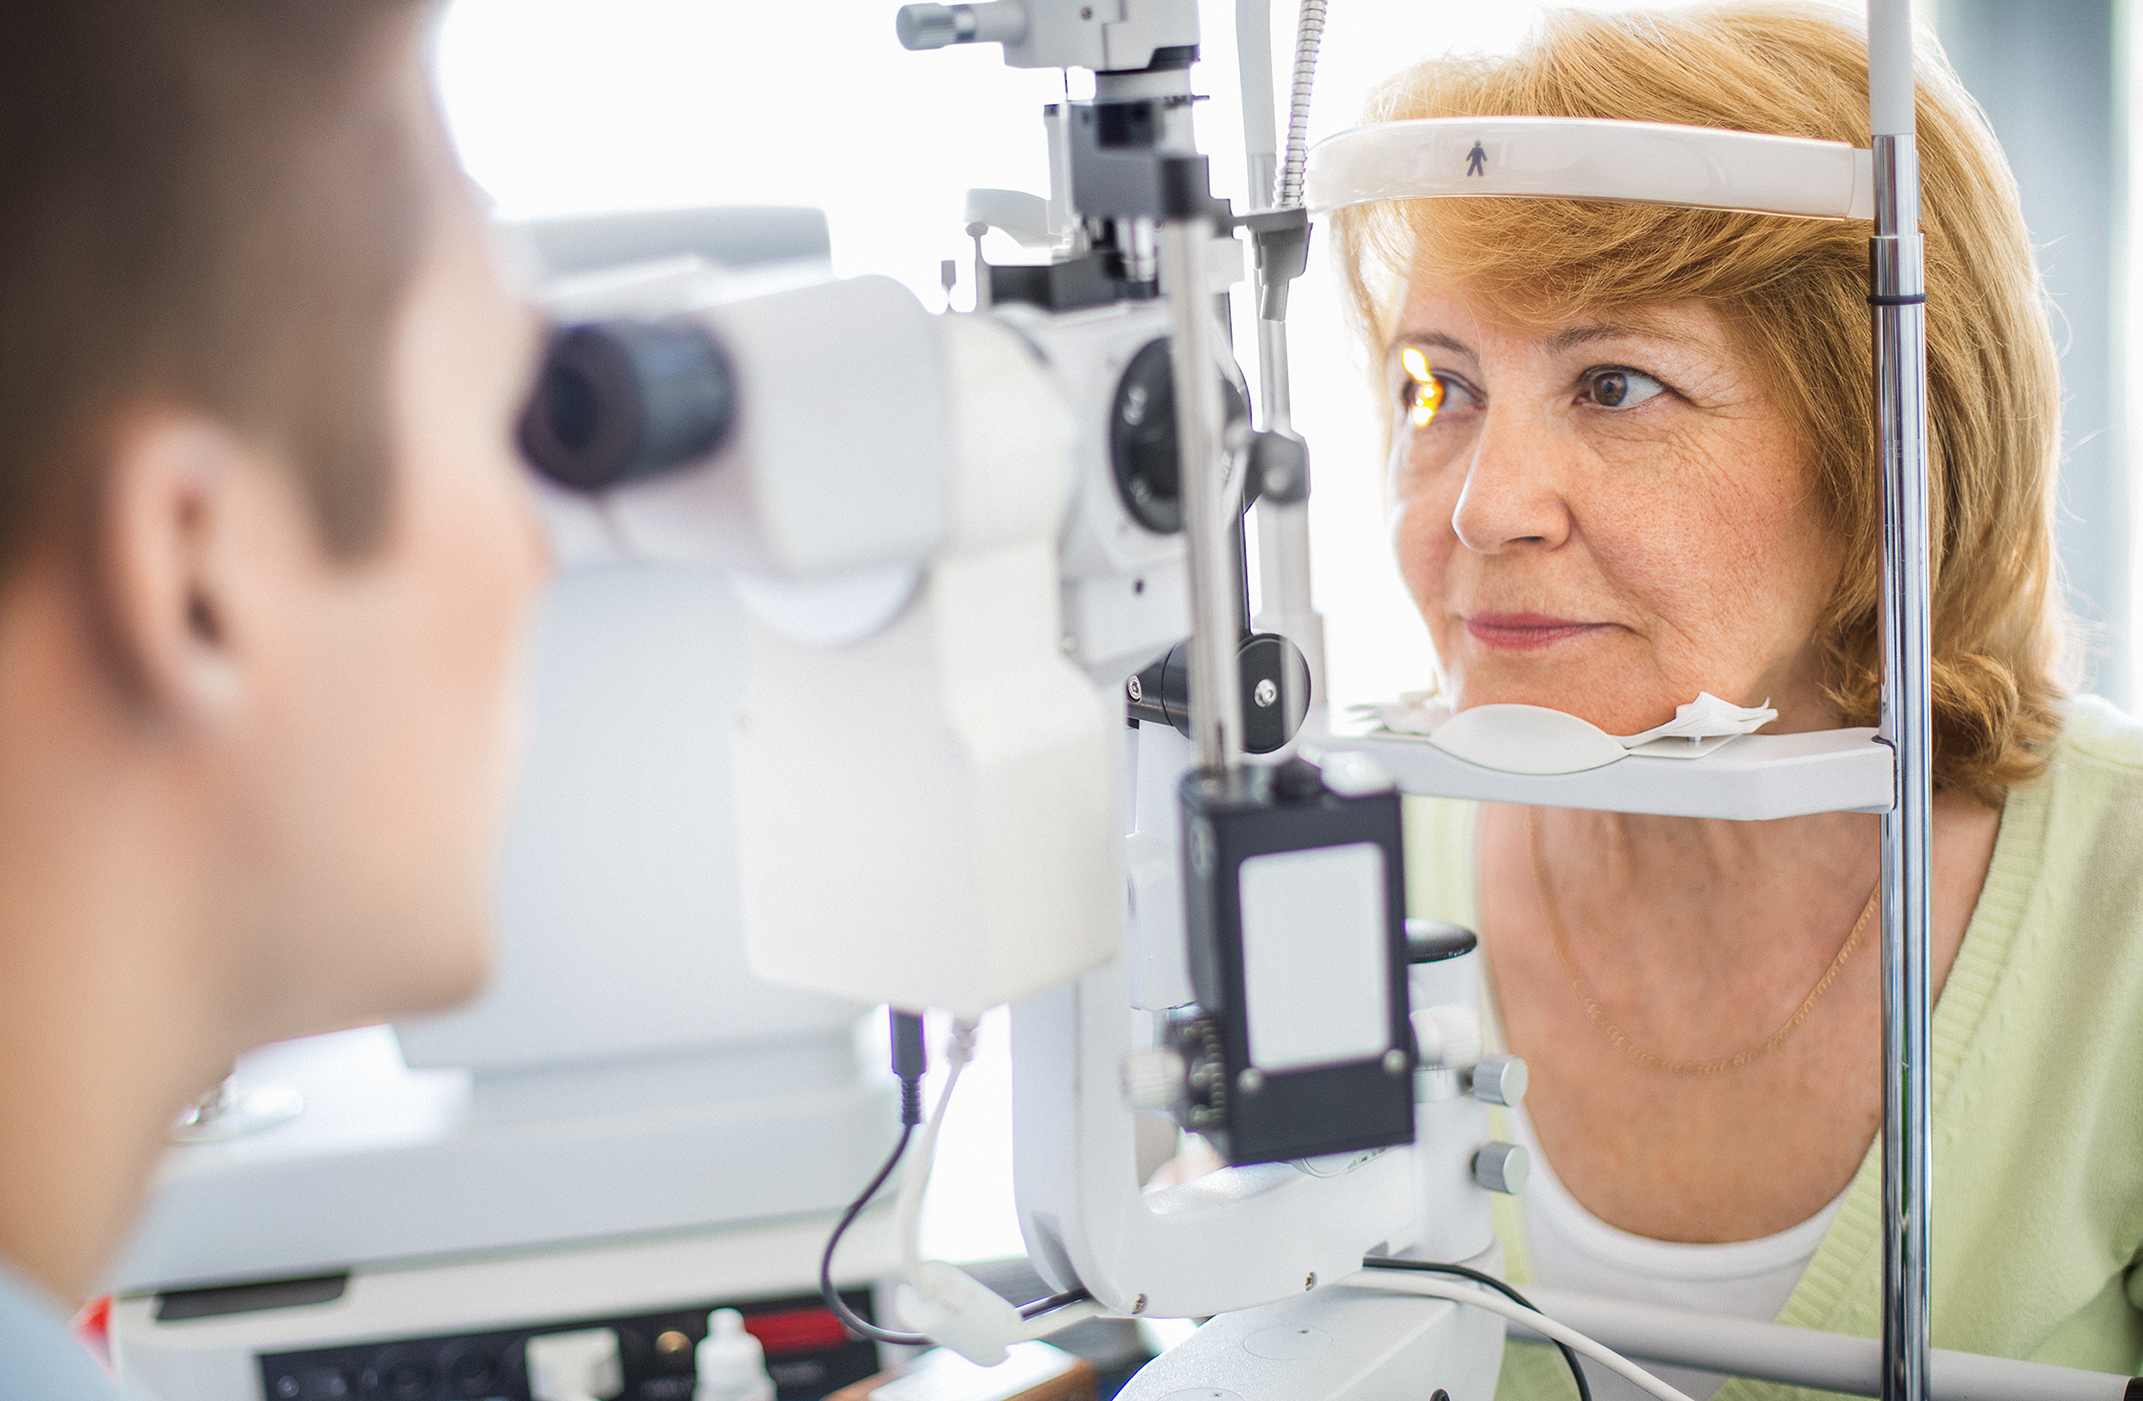 A optometrist is testing eyes of a woman